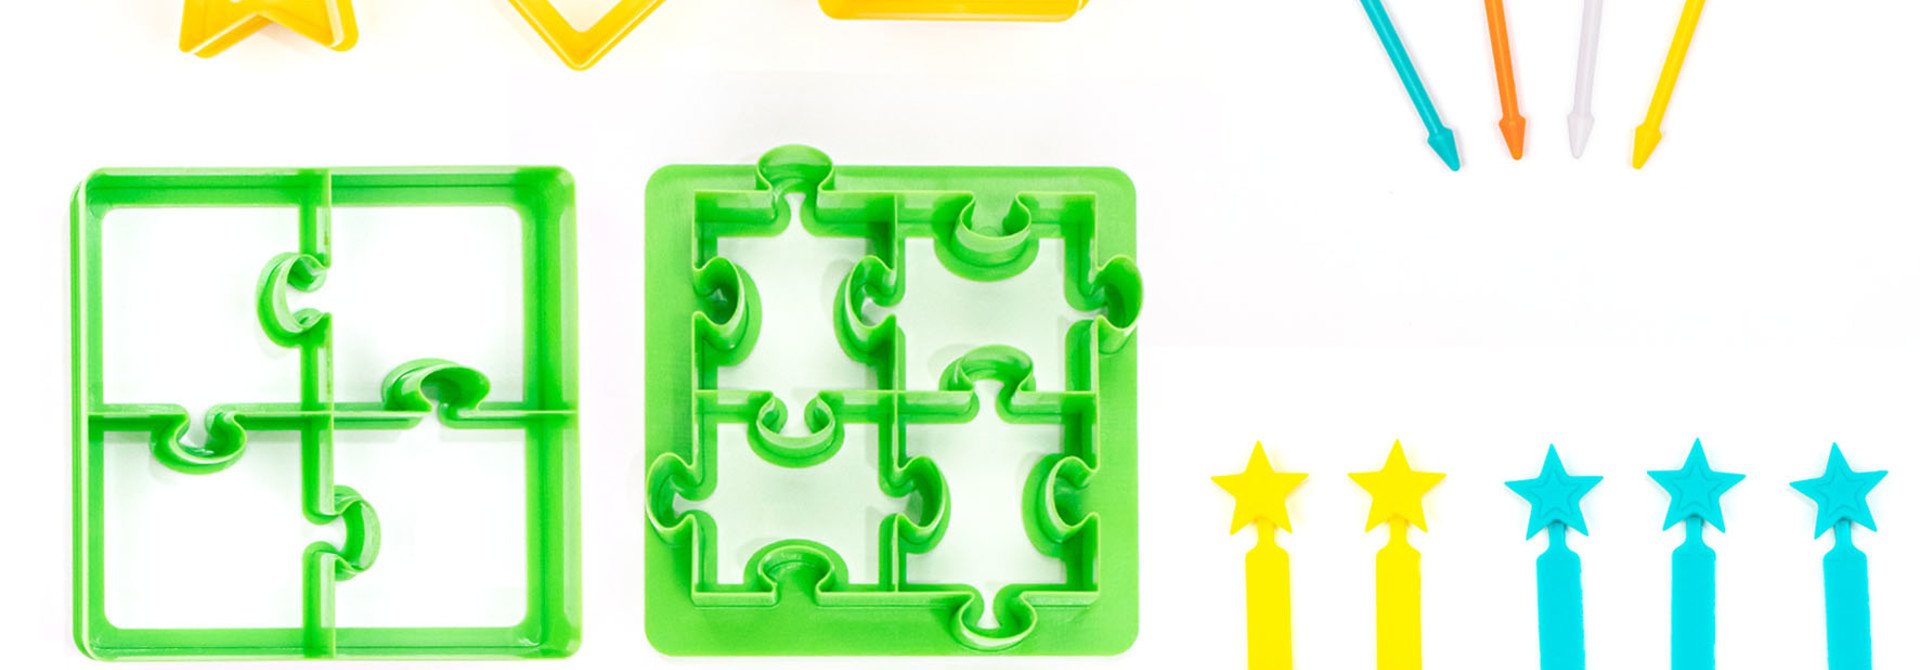 Lunch Punch Cutter & Bento Set - Dino - Puzzle